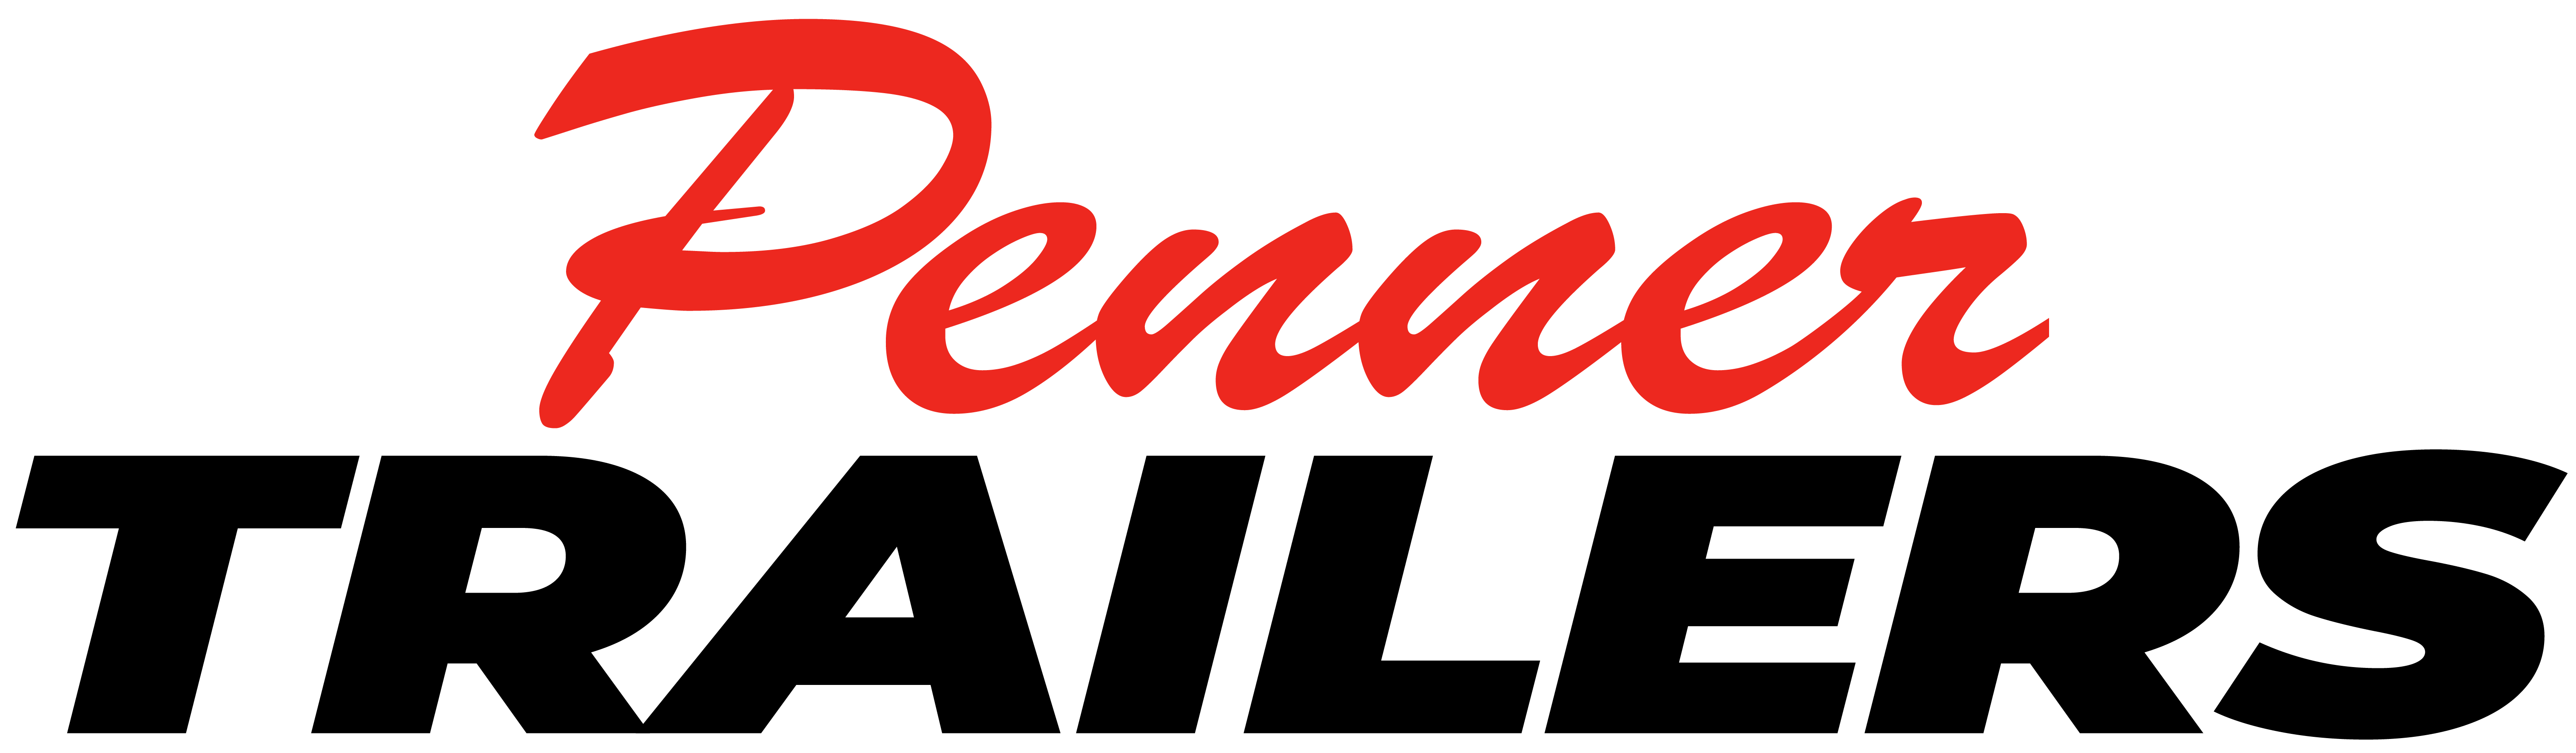 Penner Trailers Logo - "penner" in red cursive and "trailers" in black bold italic font